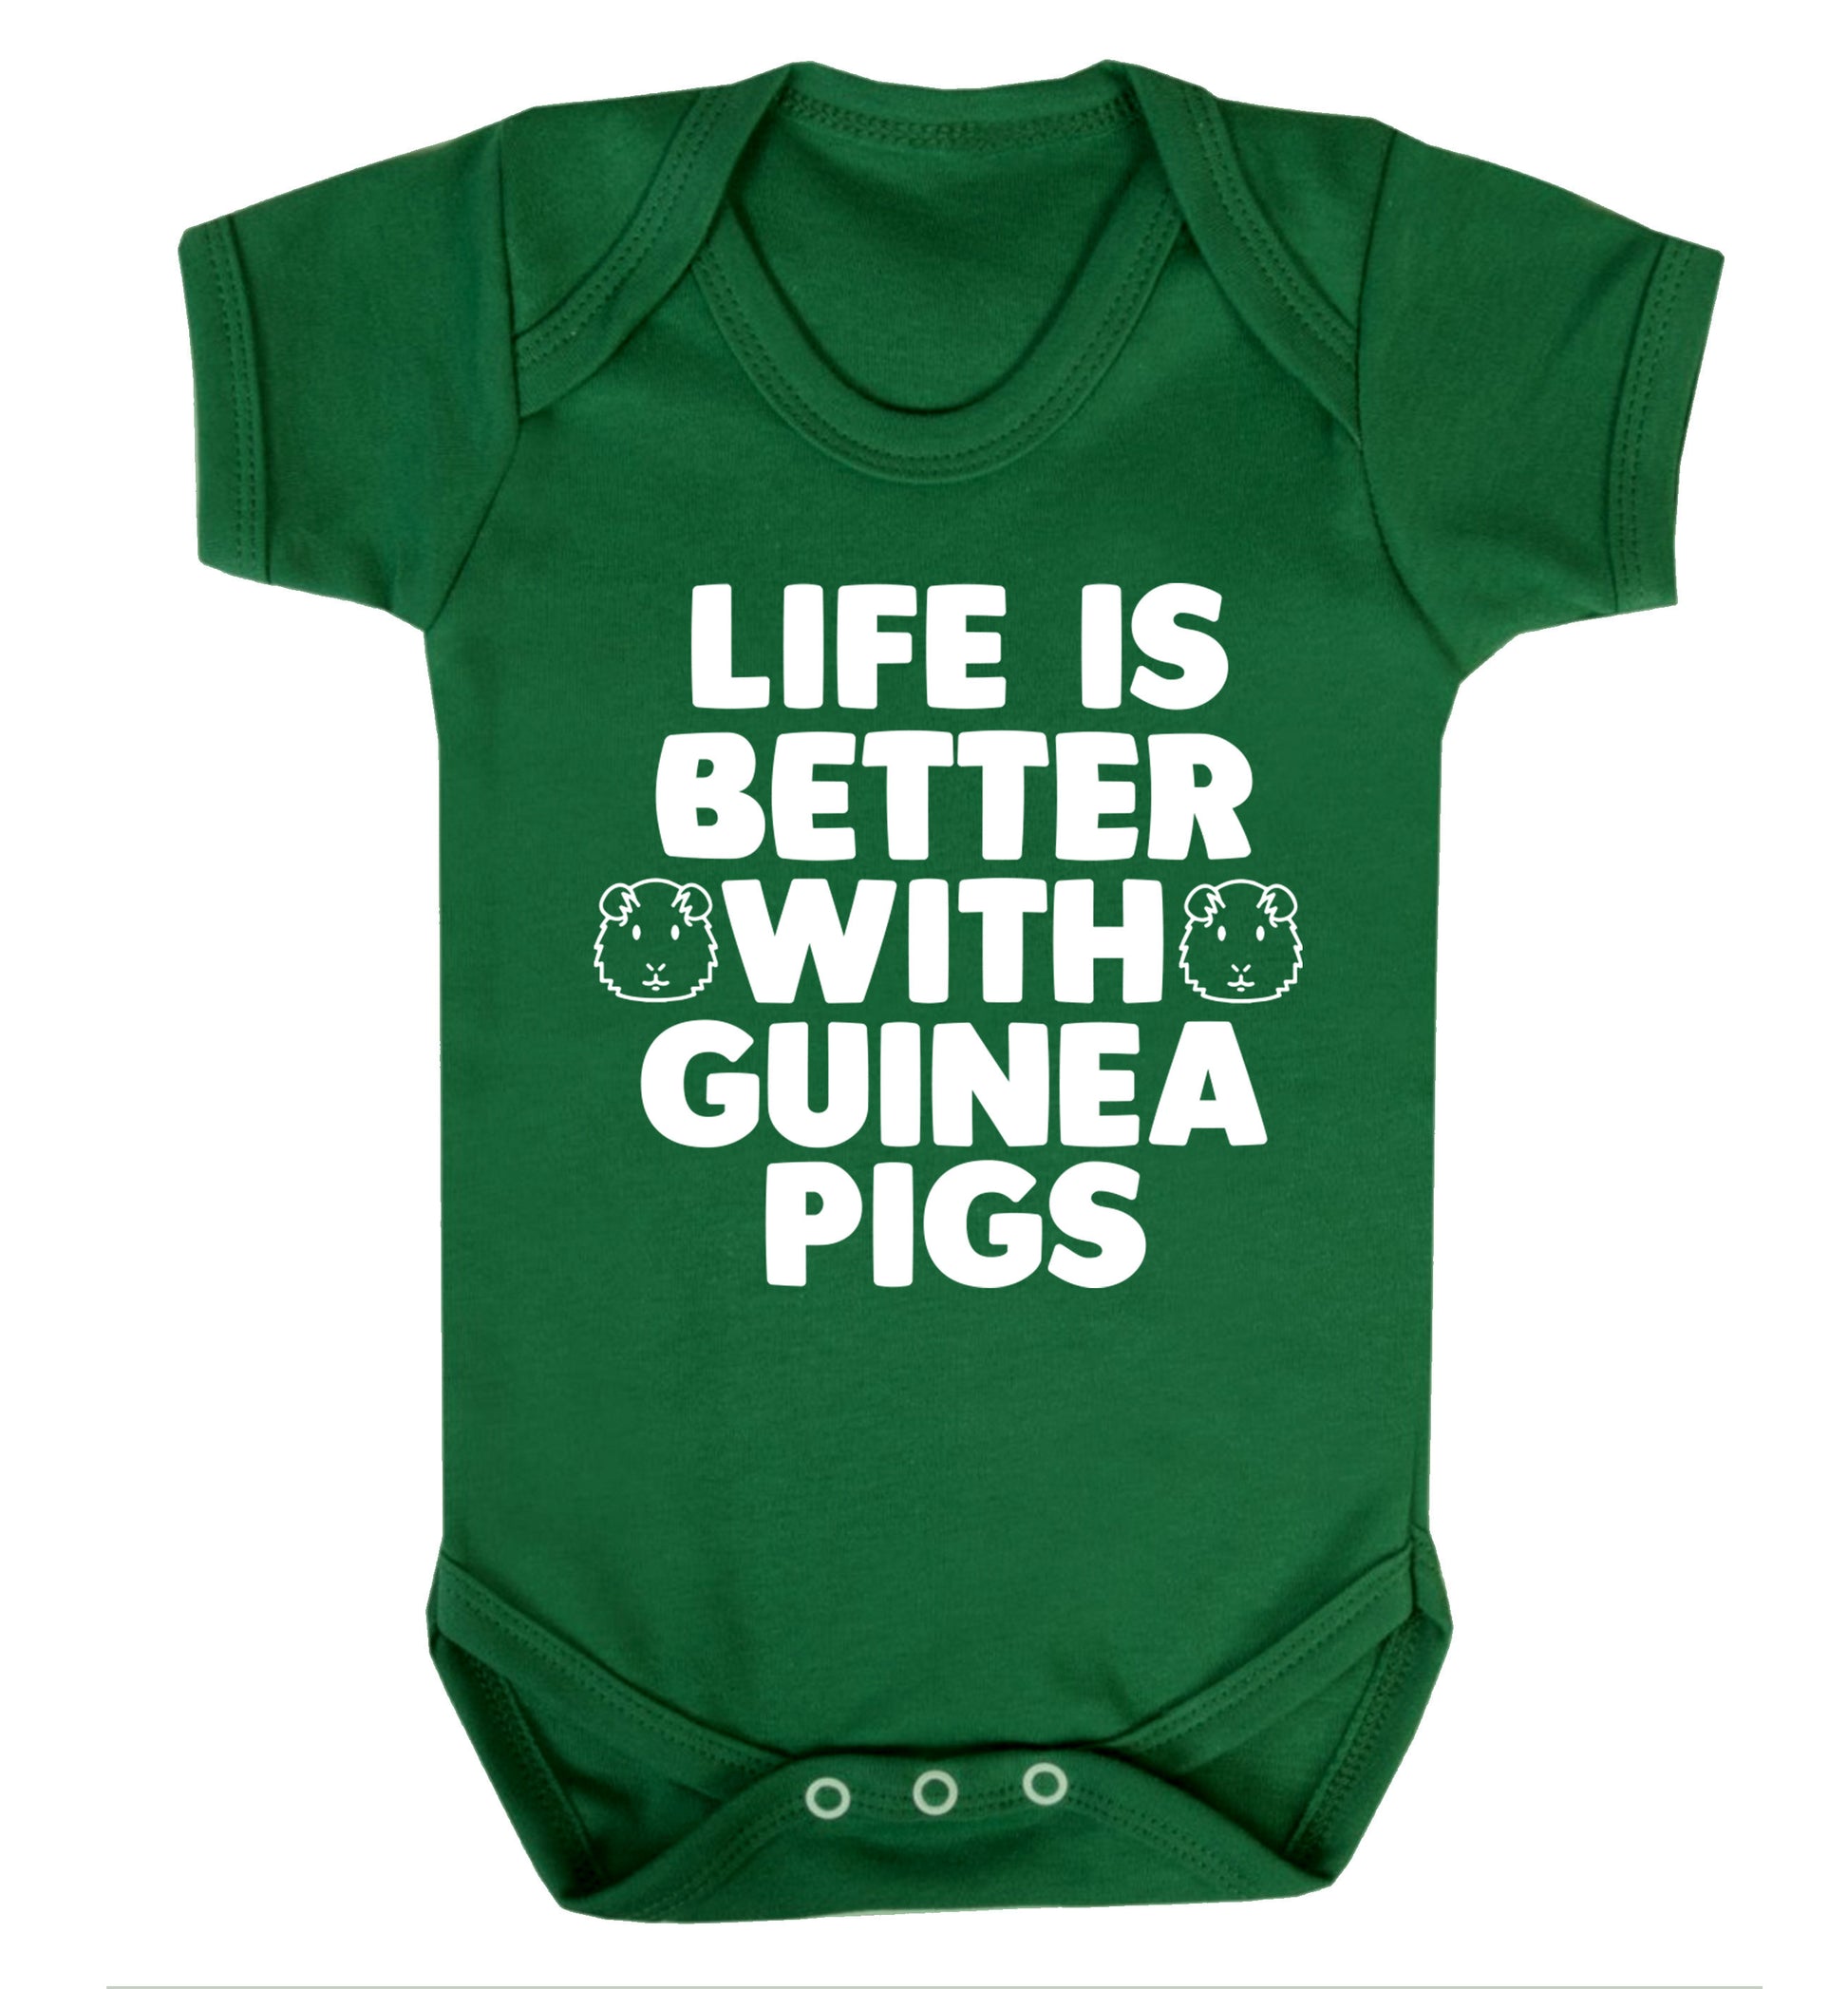 Life is better with guinea pigs Baby Vest green 18-24 months